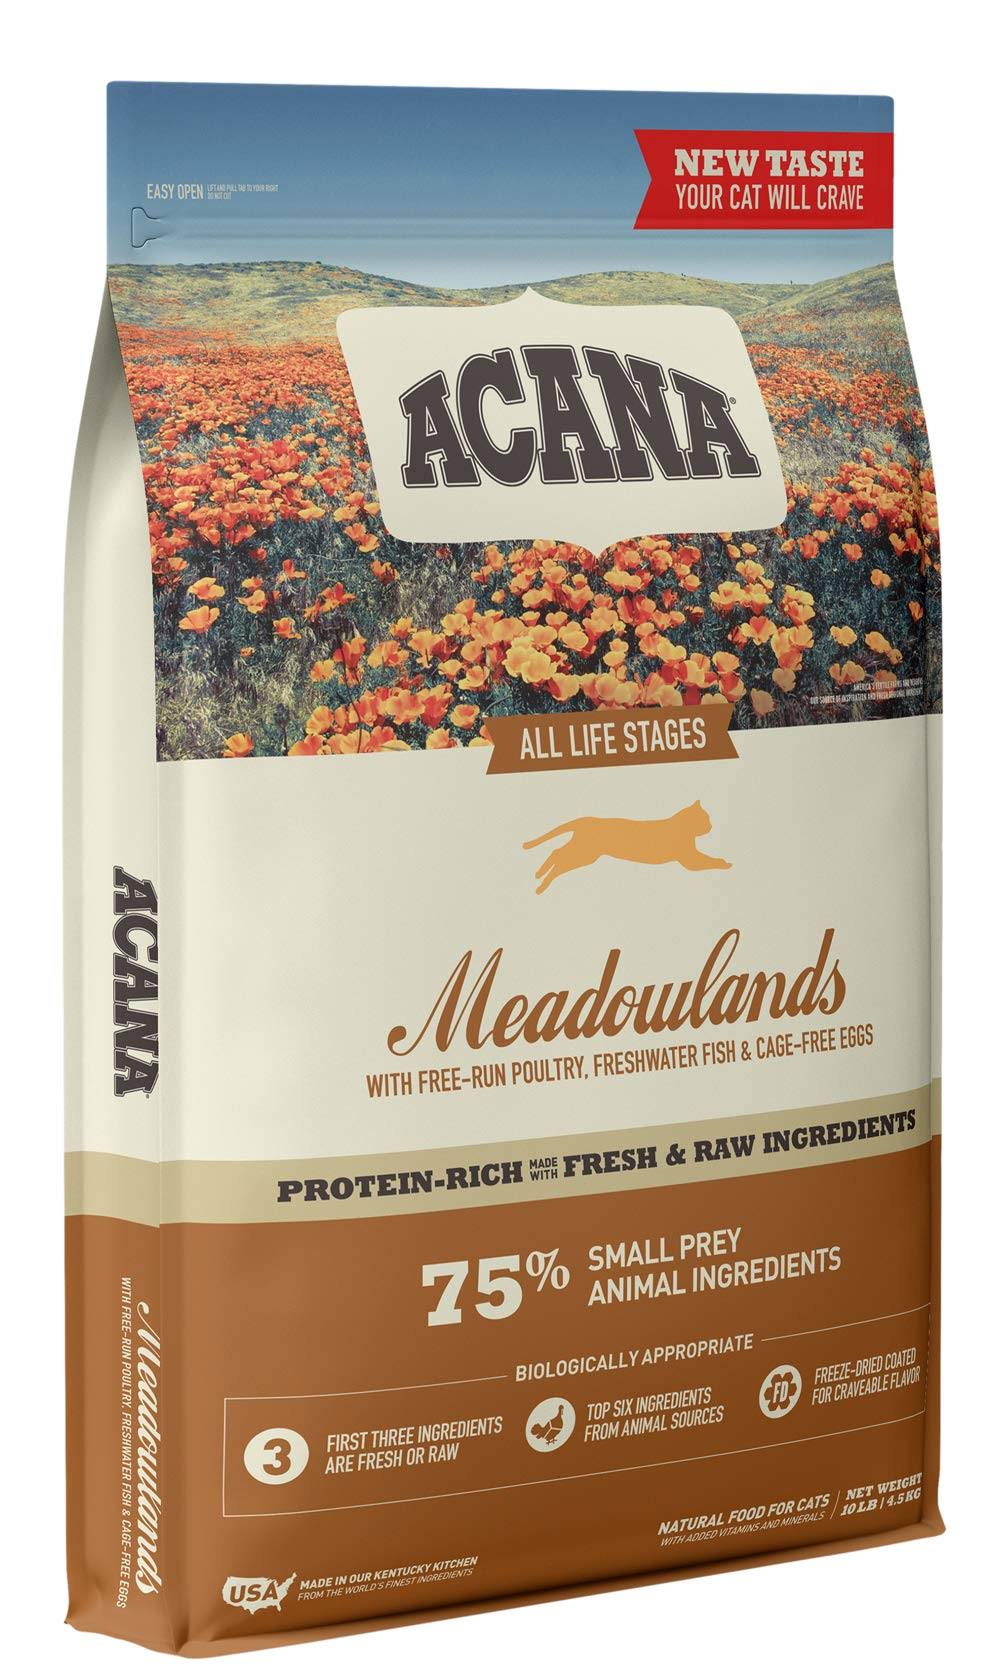 Acana Dry Cat Food, Meadowlands, Chicken, Turkey, Fish And Cage-Free Eggs, 10lb